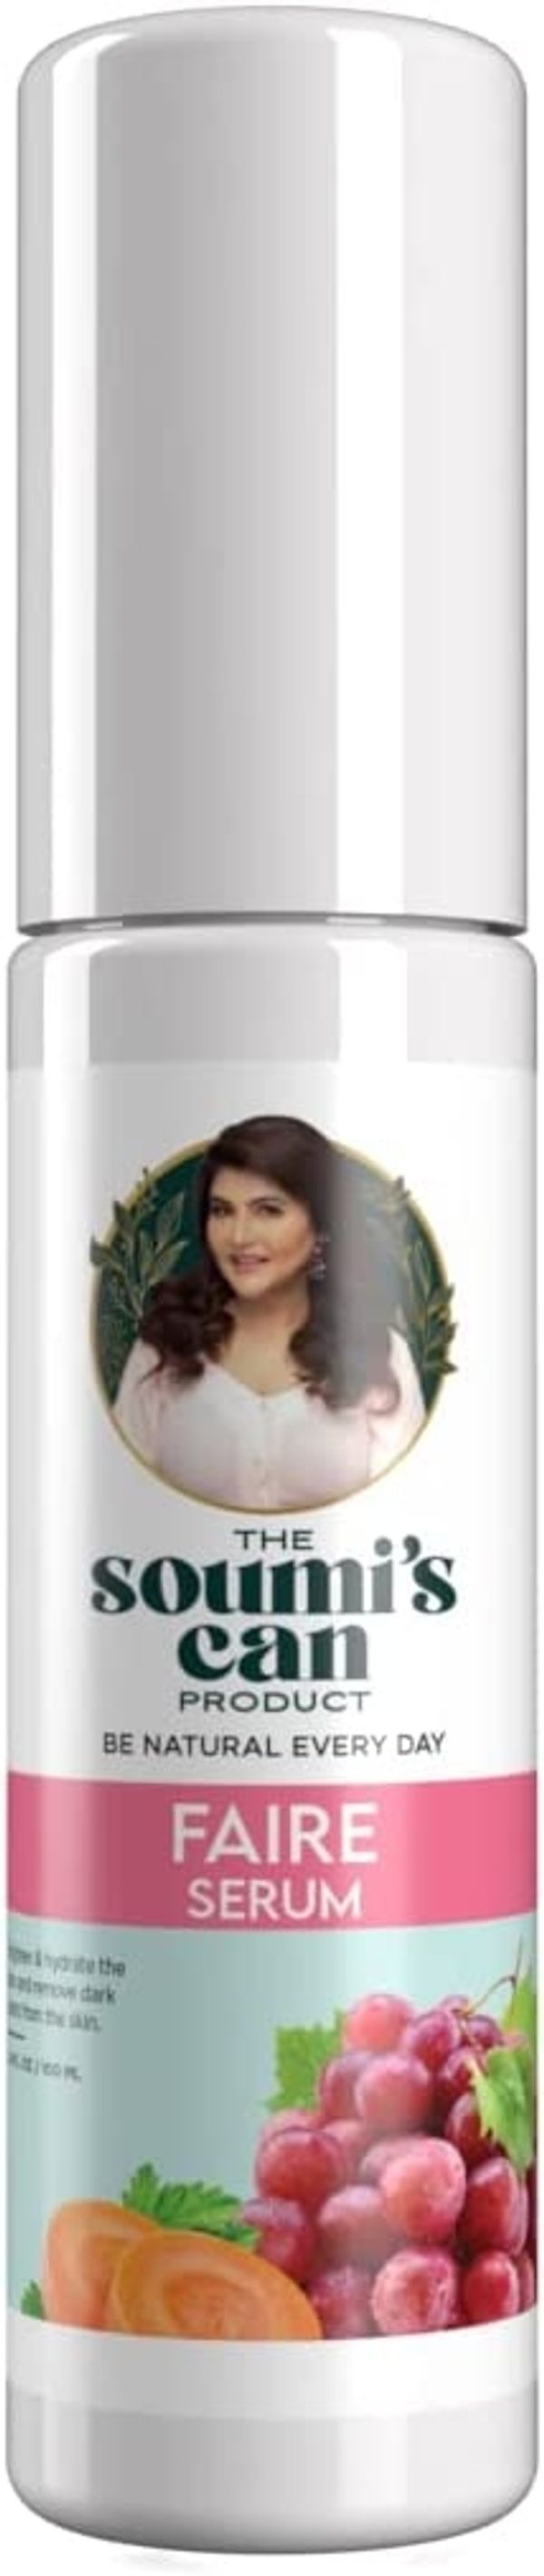 The Soumi's Can Product Can Faire Serum,100ml